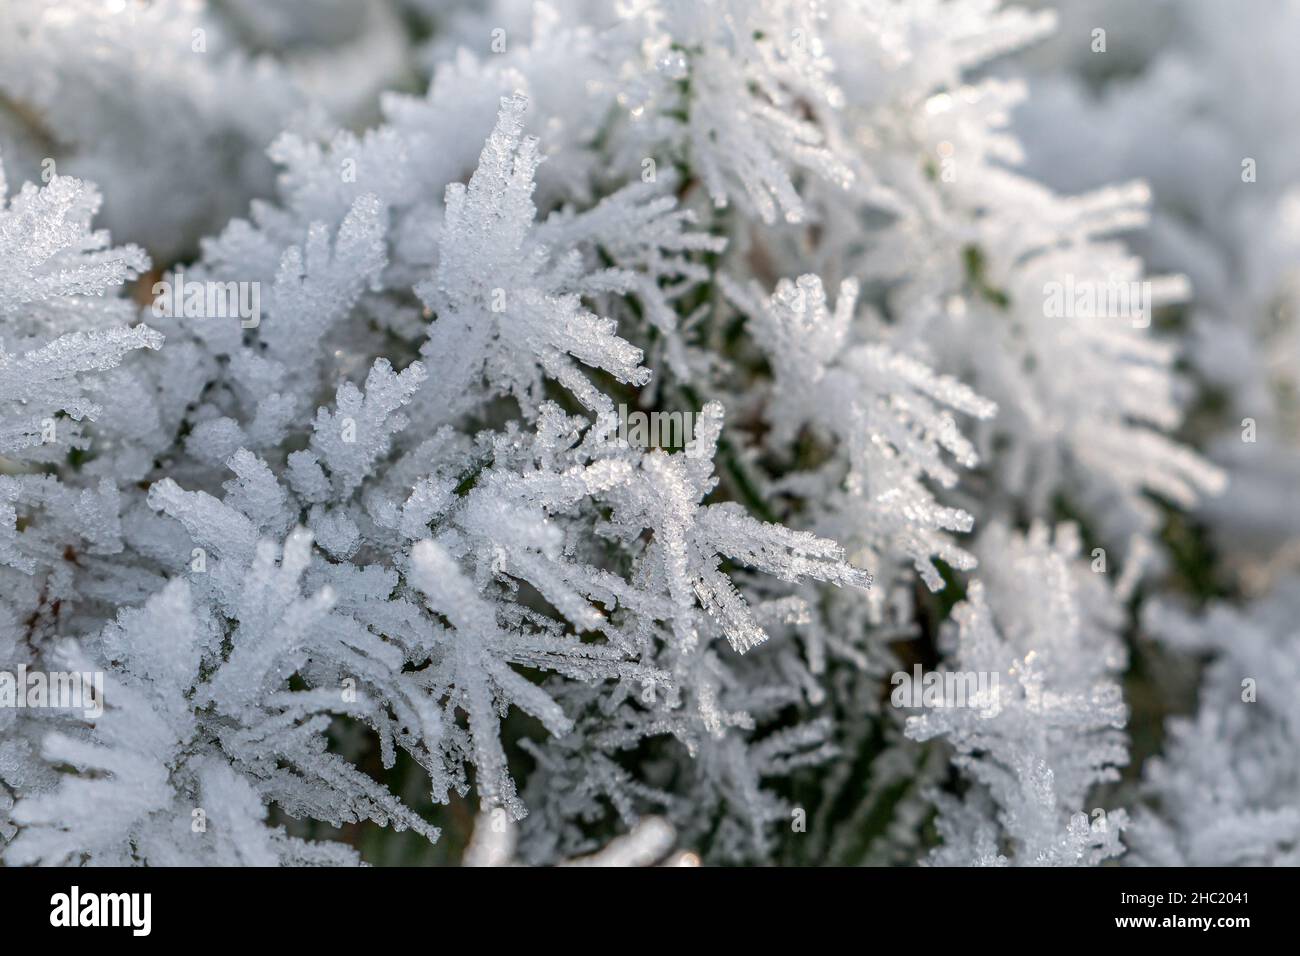 Frozen rime on the grass, with the beautiful ice crystals in the winter landscape of the Netherlands in the month of December Stock Photo